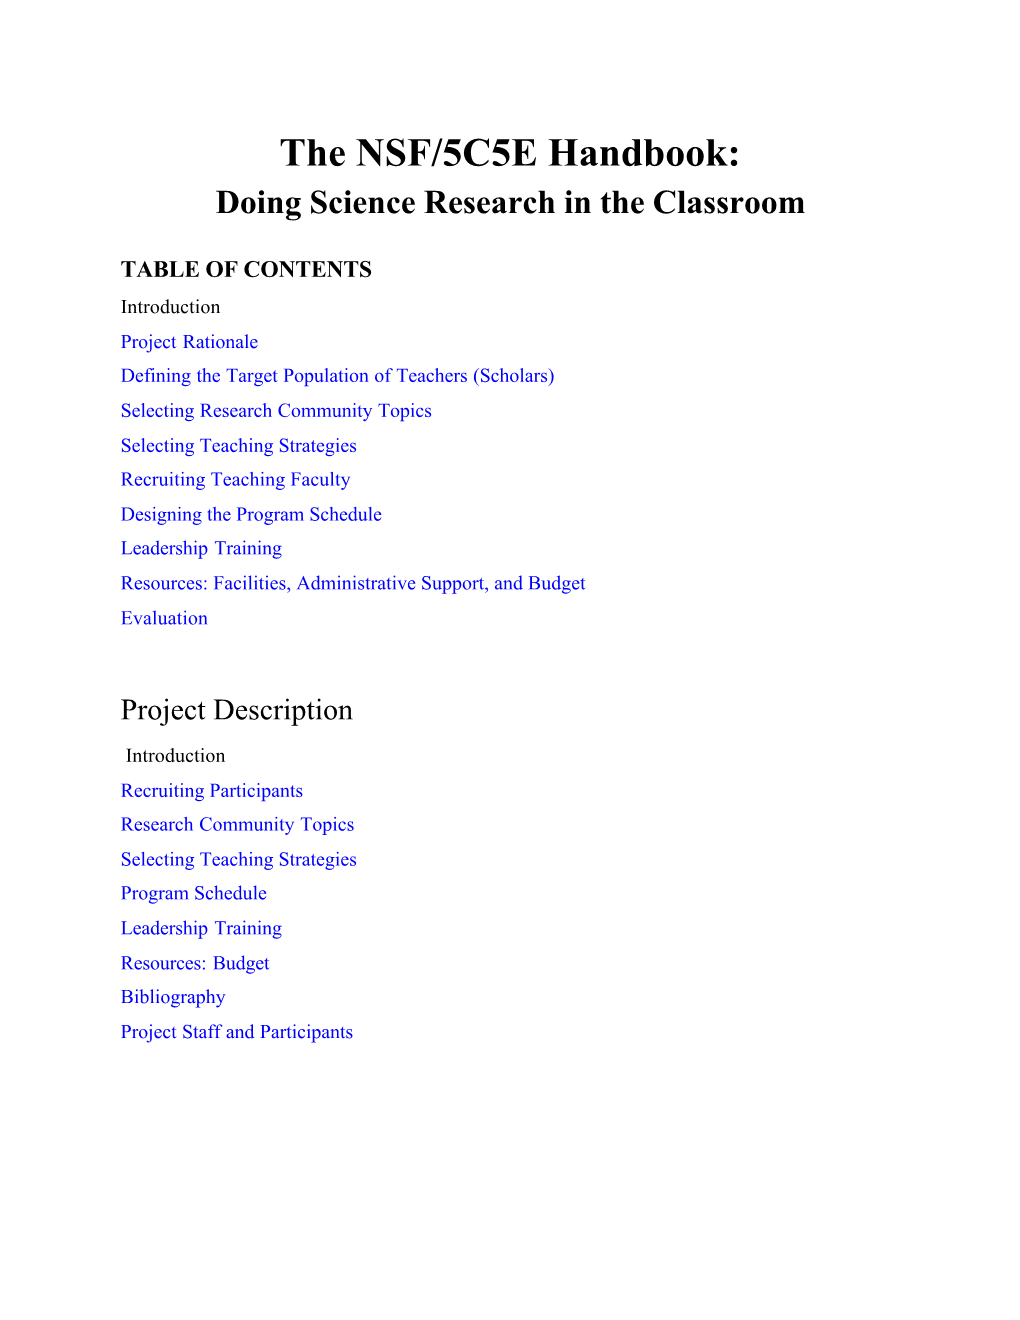 Doing Science Research in the Classroom